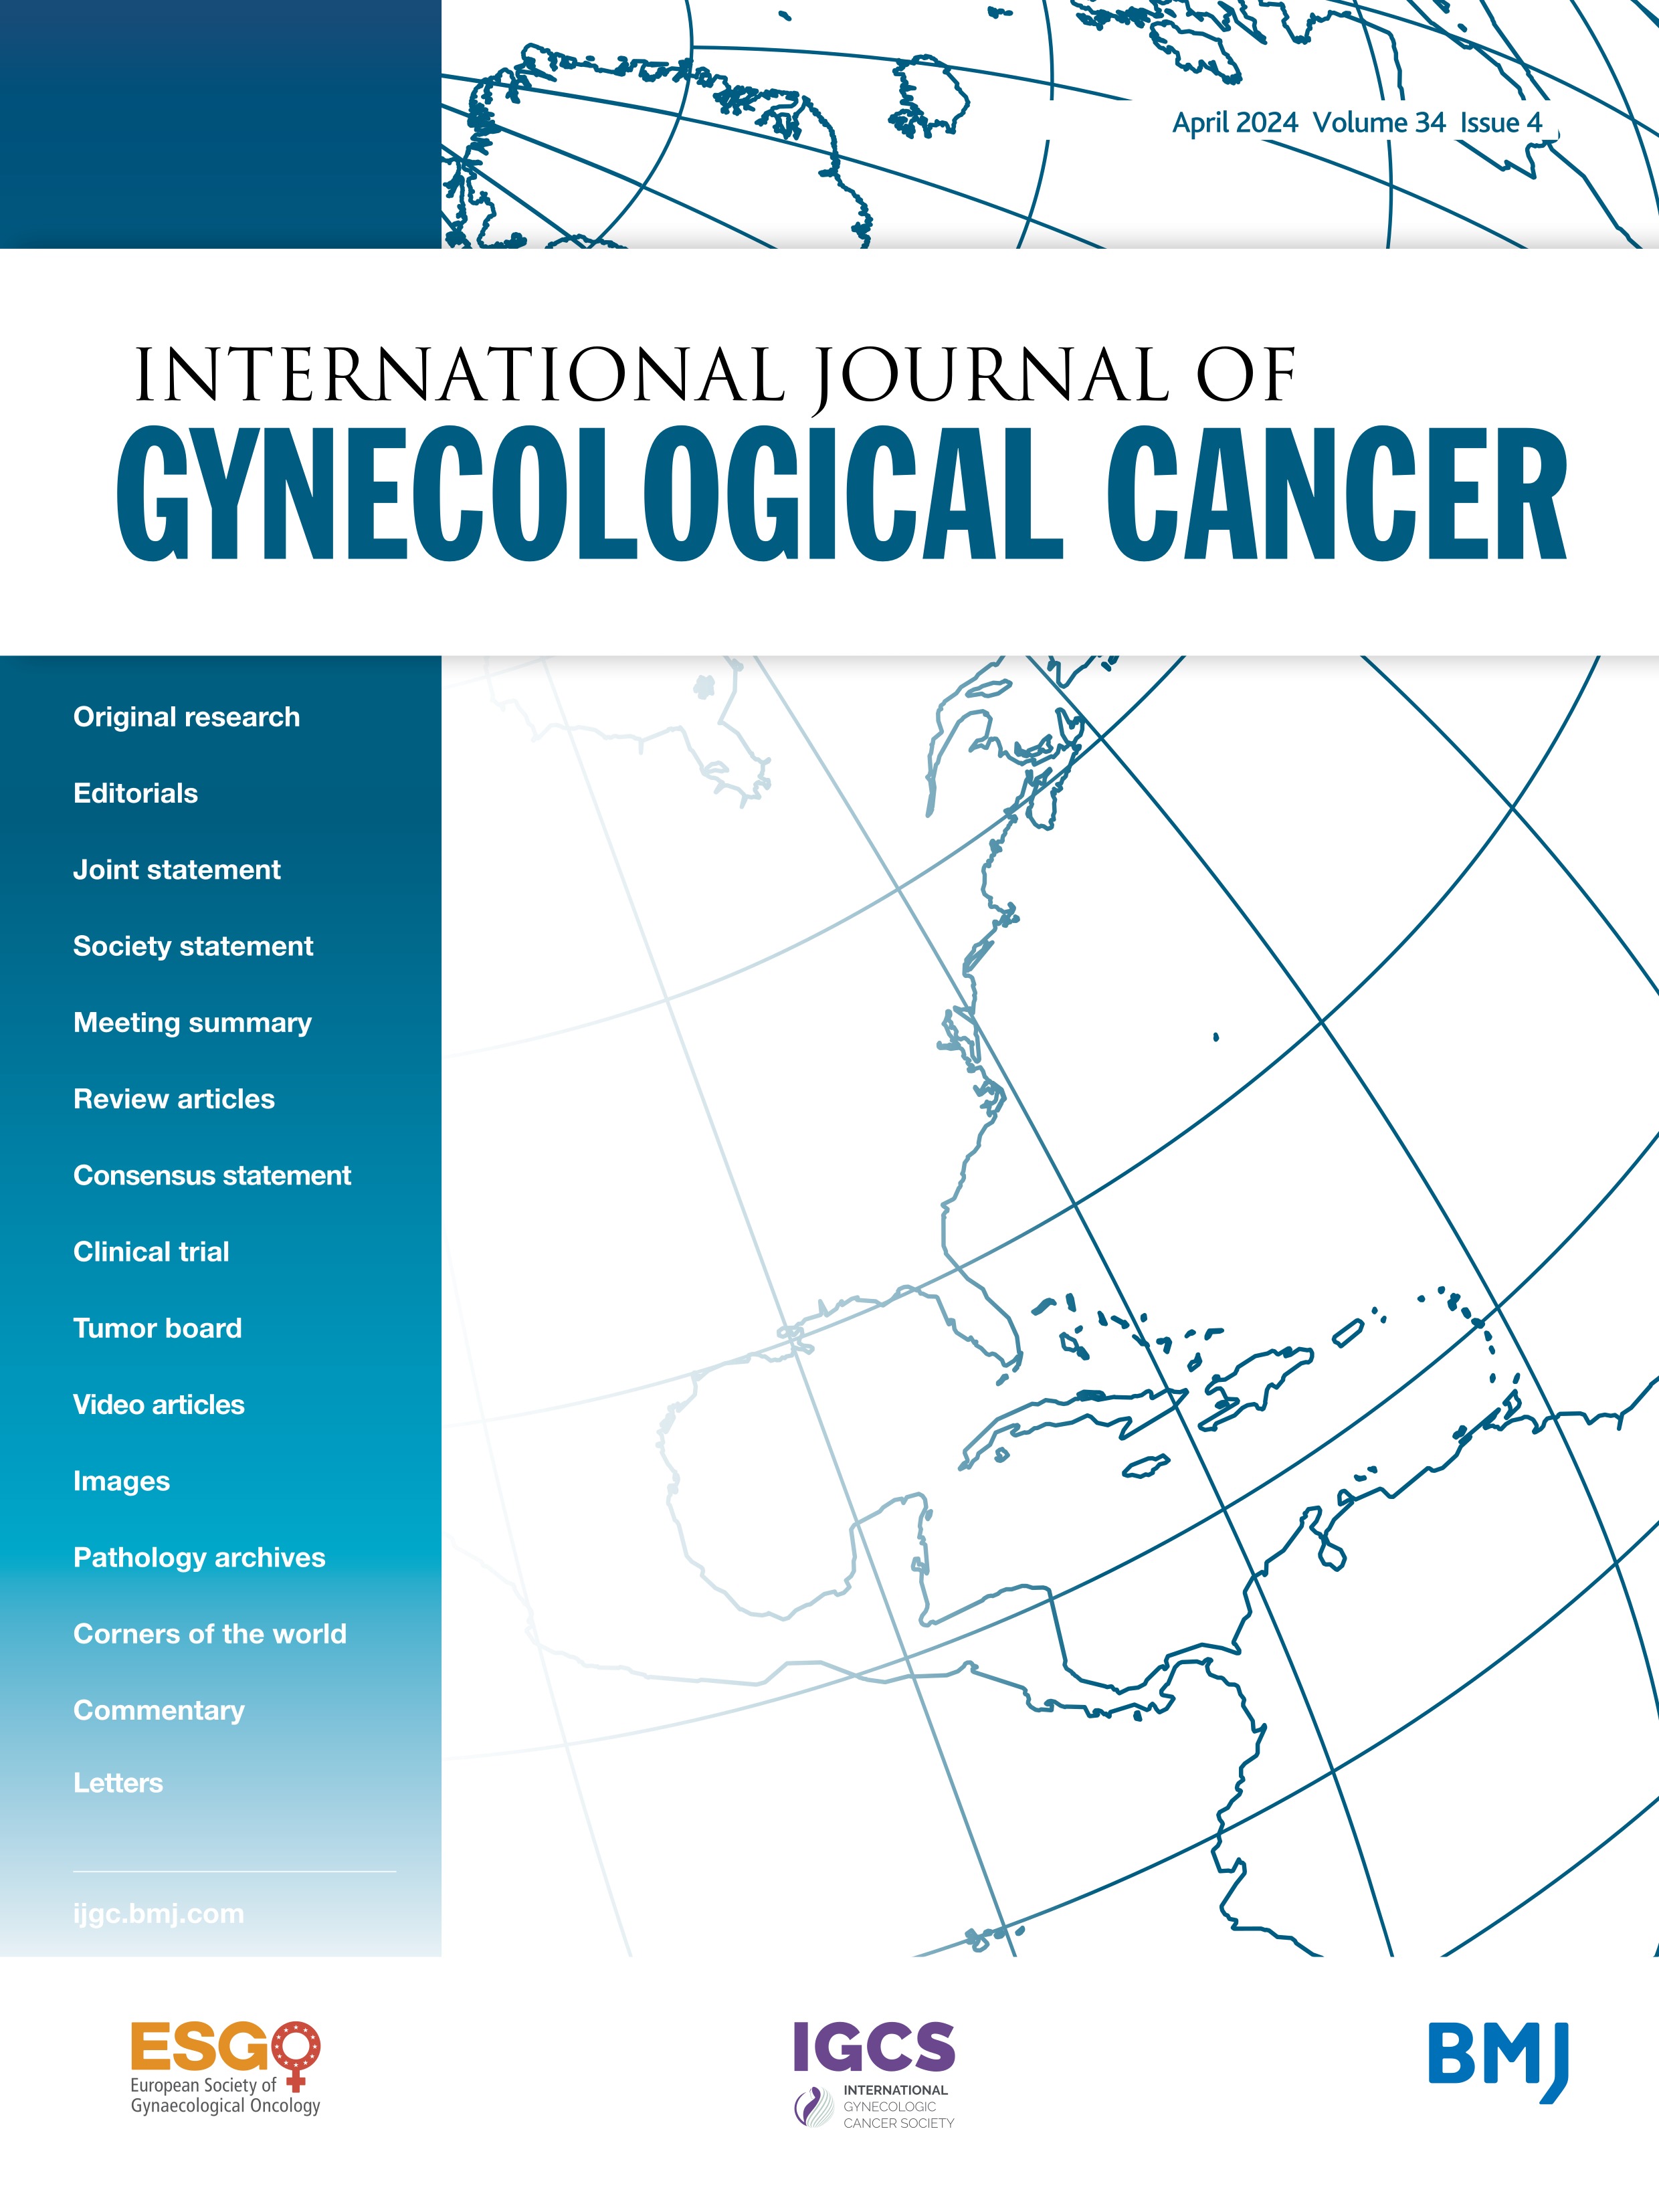 The International Gynecologic Cancer Society Preinvasive Certificate Program: building a skilled workforce for the detection and treatment of cervical pre-cancer